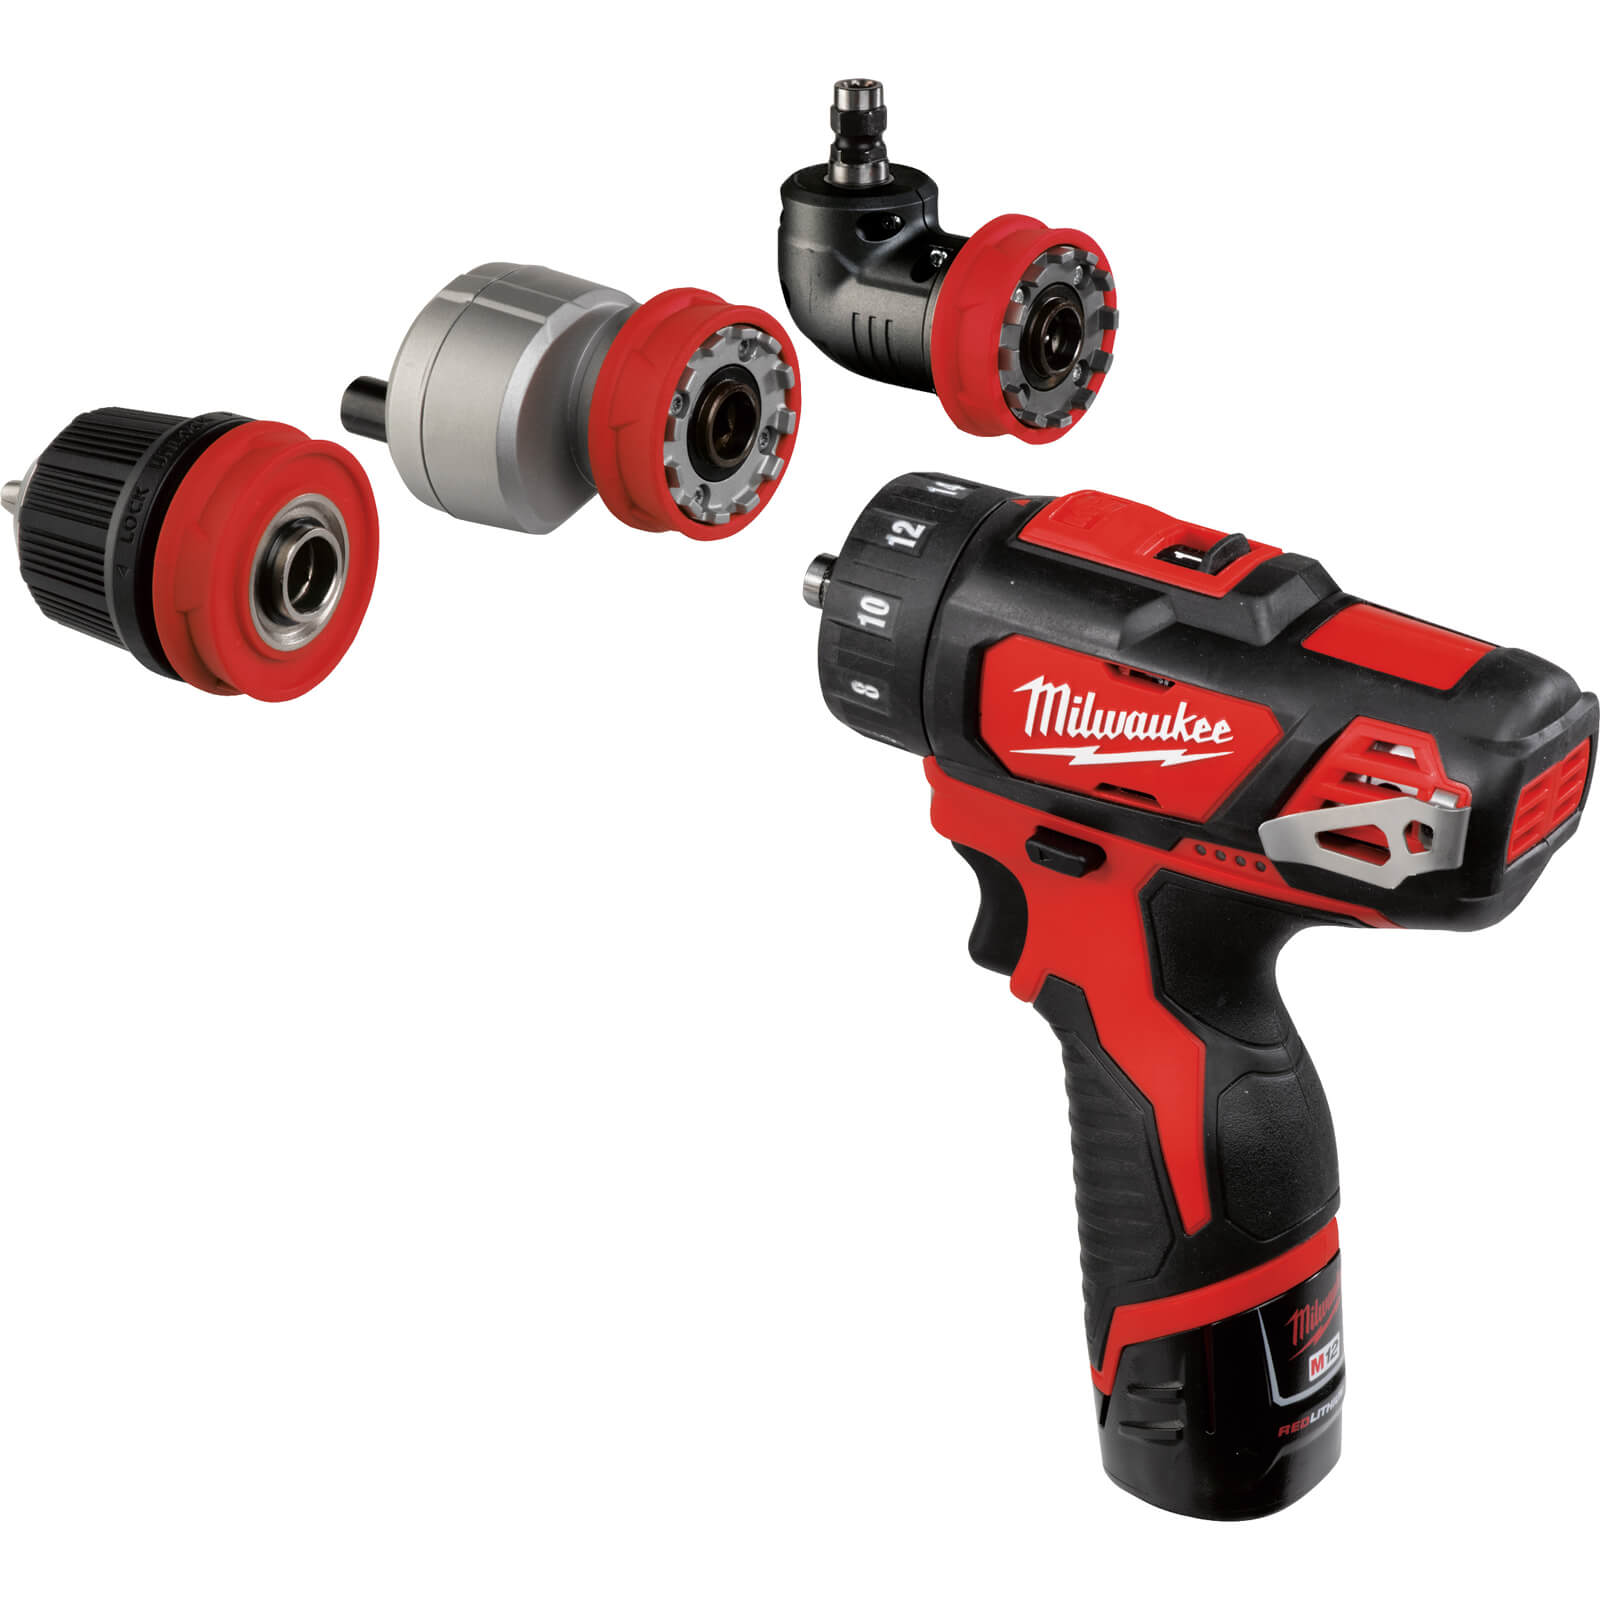 Image of Milwaukee M12 BDDXKIT 12v Cordless Installation Drill Driver 2 x 2ah Li-ion Charger Case